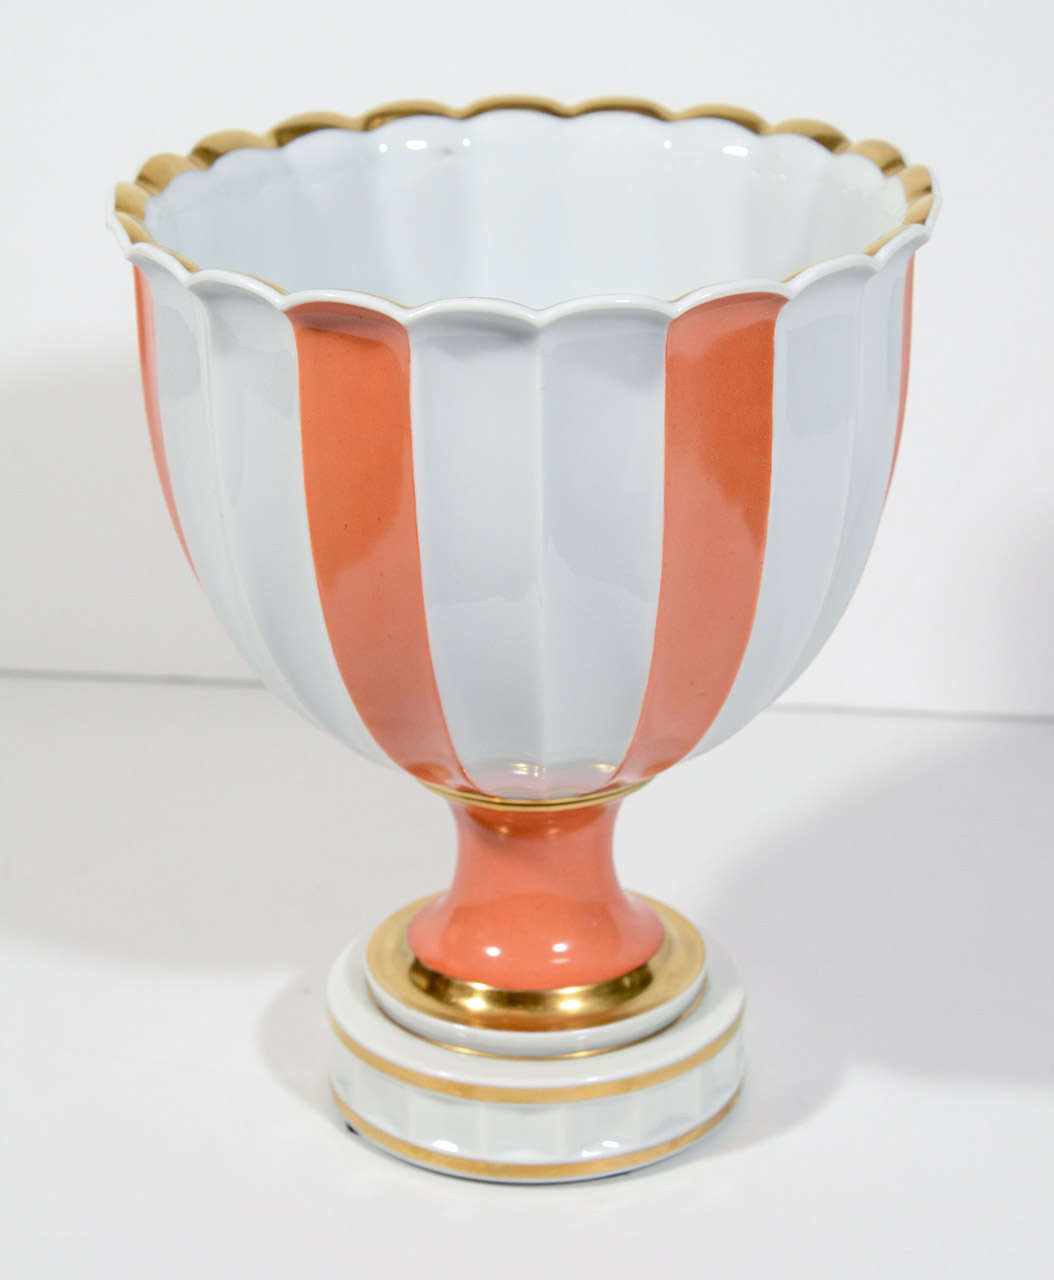 Gorgeous porcelain footed bowl with classic urn form.  Urn has a fine glaze finish in white with persimmon stripes and with hand finished gold leaf details. Also features scalloped brim and fluted design with detaiil with plinth base design. Signed